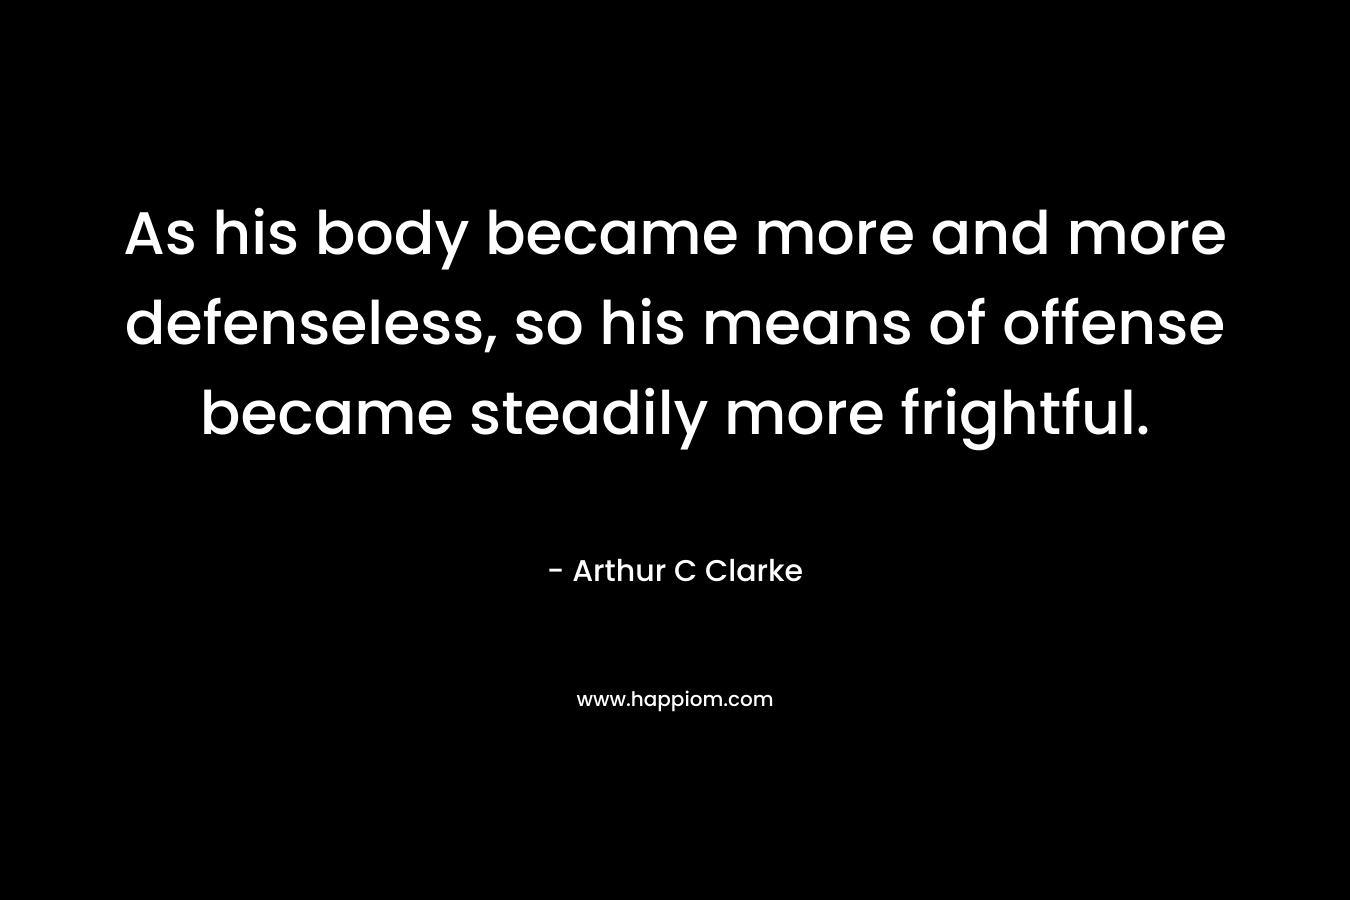 As his body became more and more defenseless, so his means of offense became steadily more frightful. – Arthur C Clarke